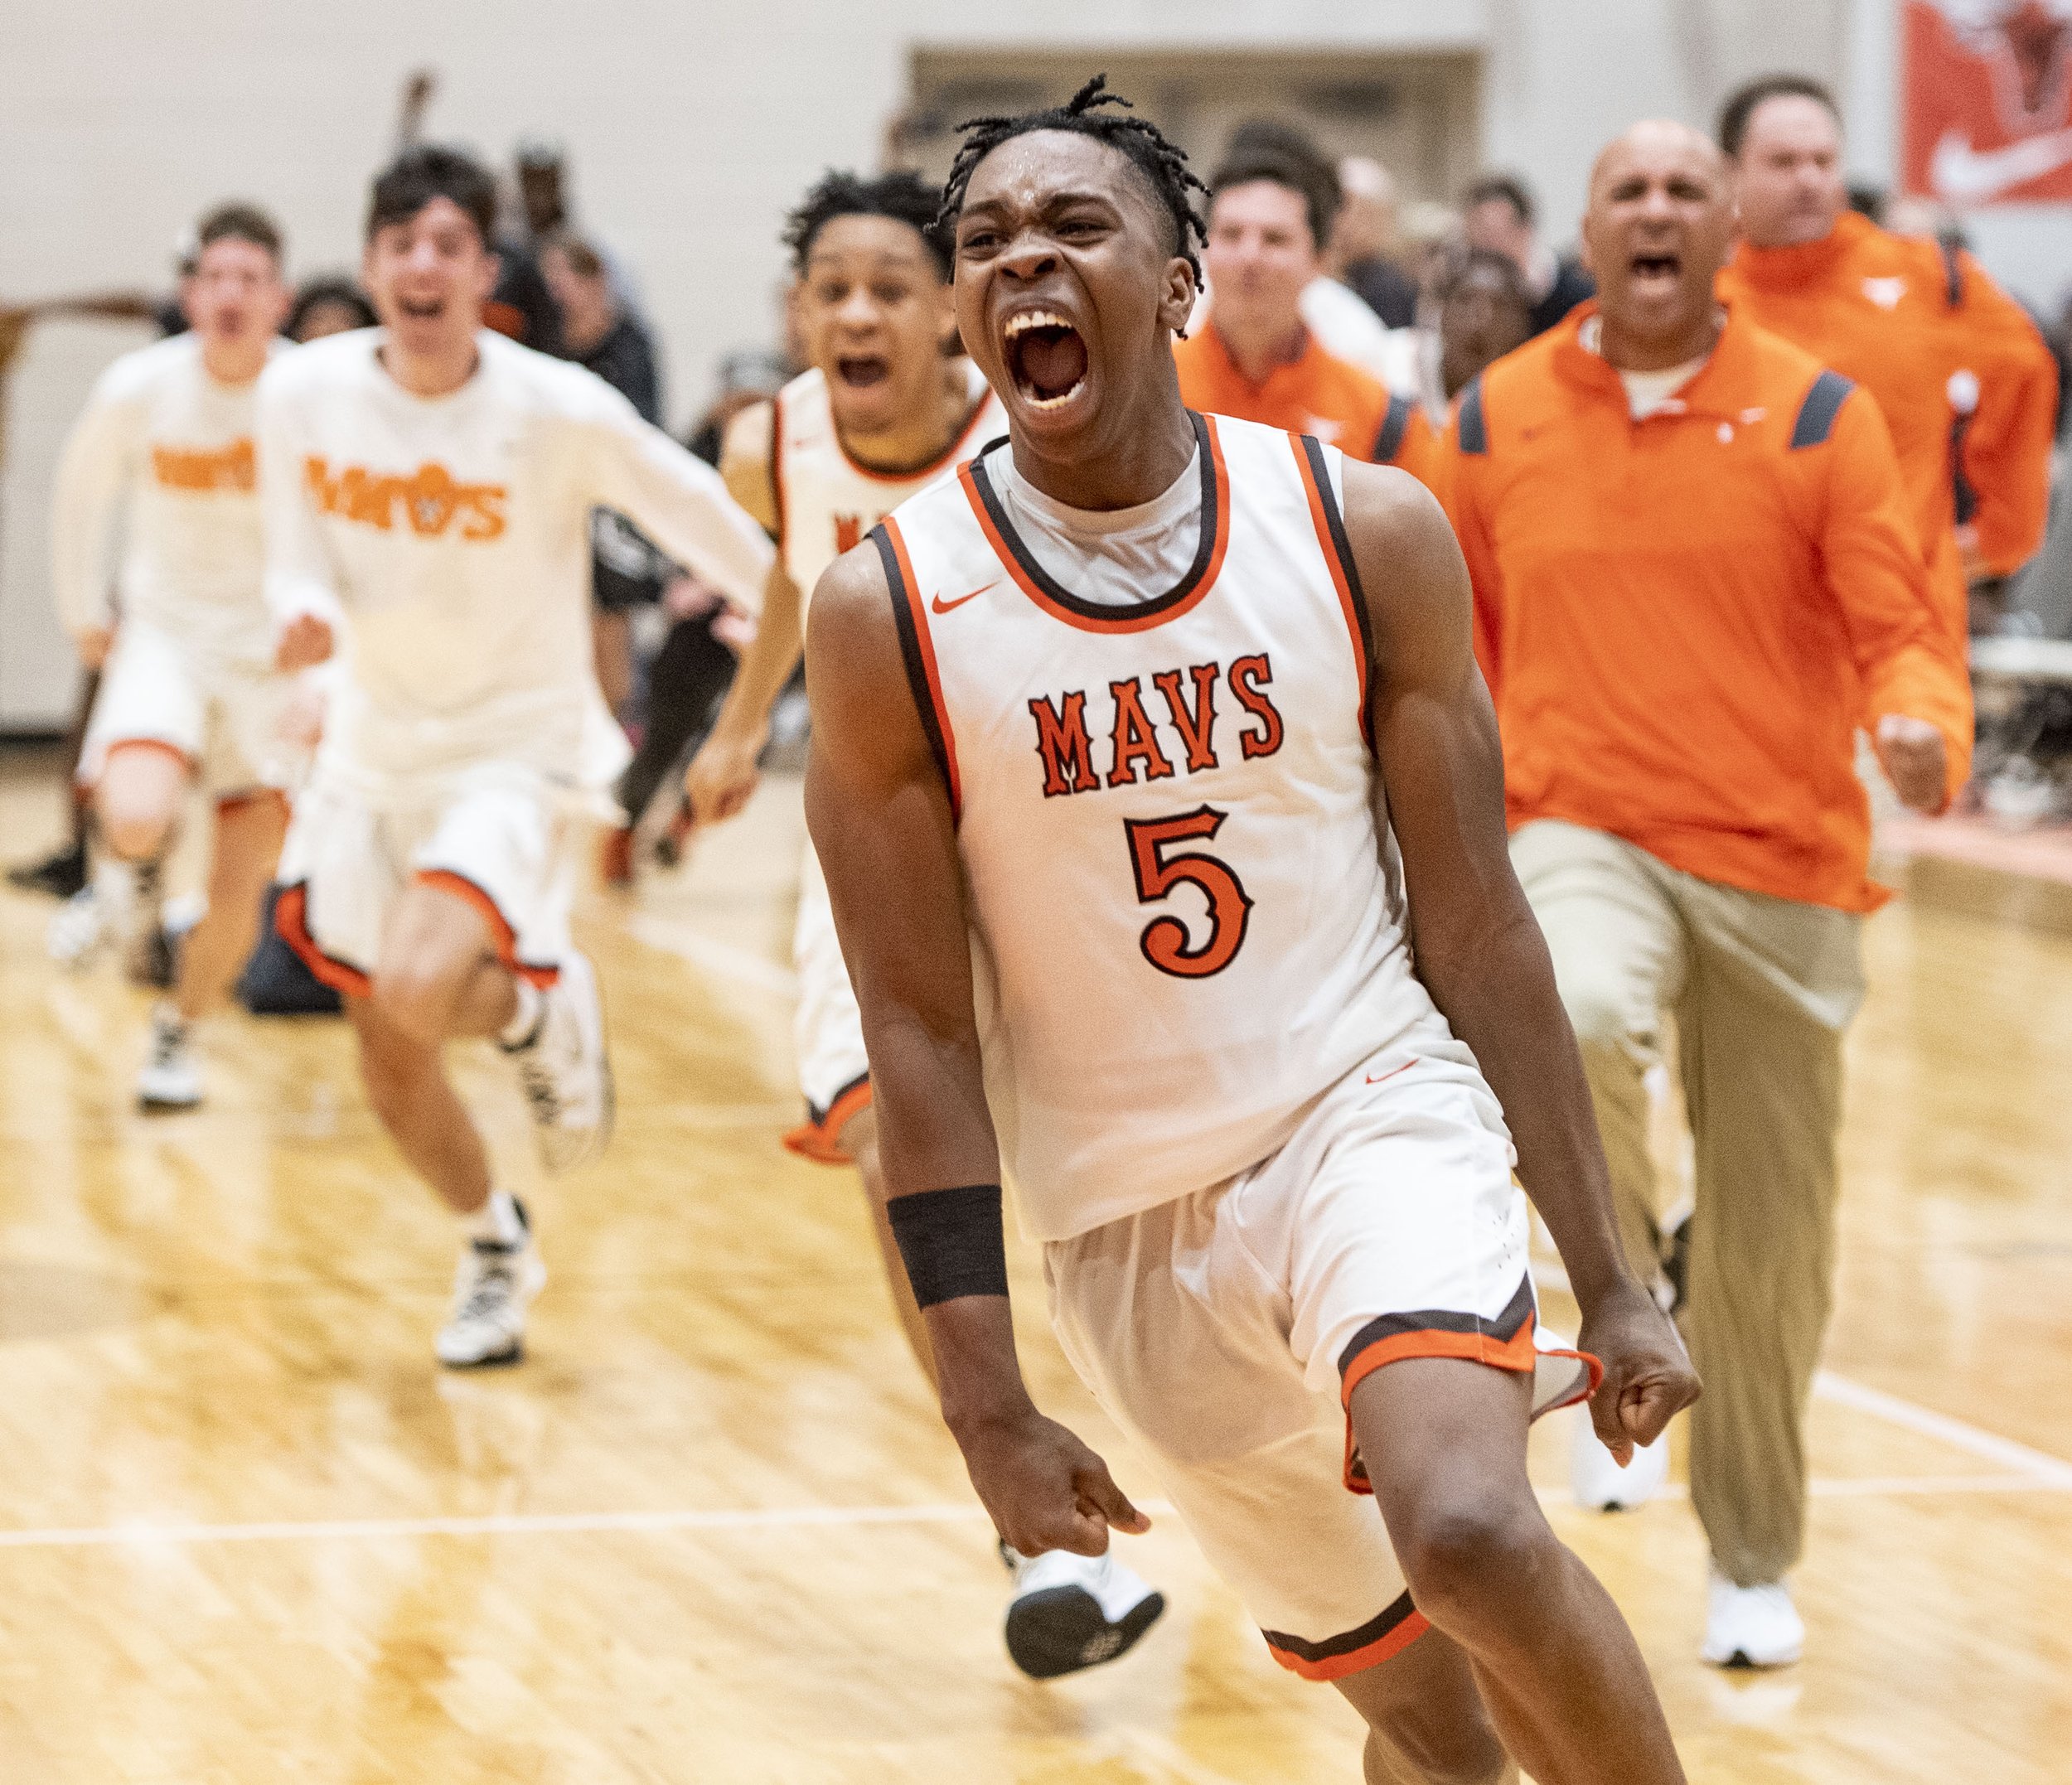  Mauldin's Caleb Byrd (5) leads his team in celebrating after beating Dorman in the Upper State semifinals at Mauldin High School, Monday, February 21, 2022.  